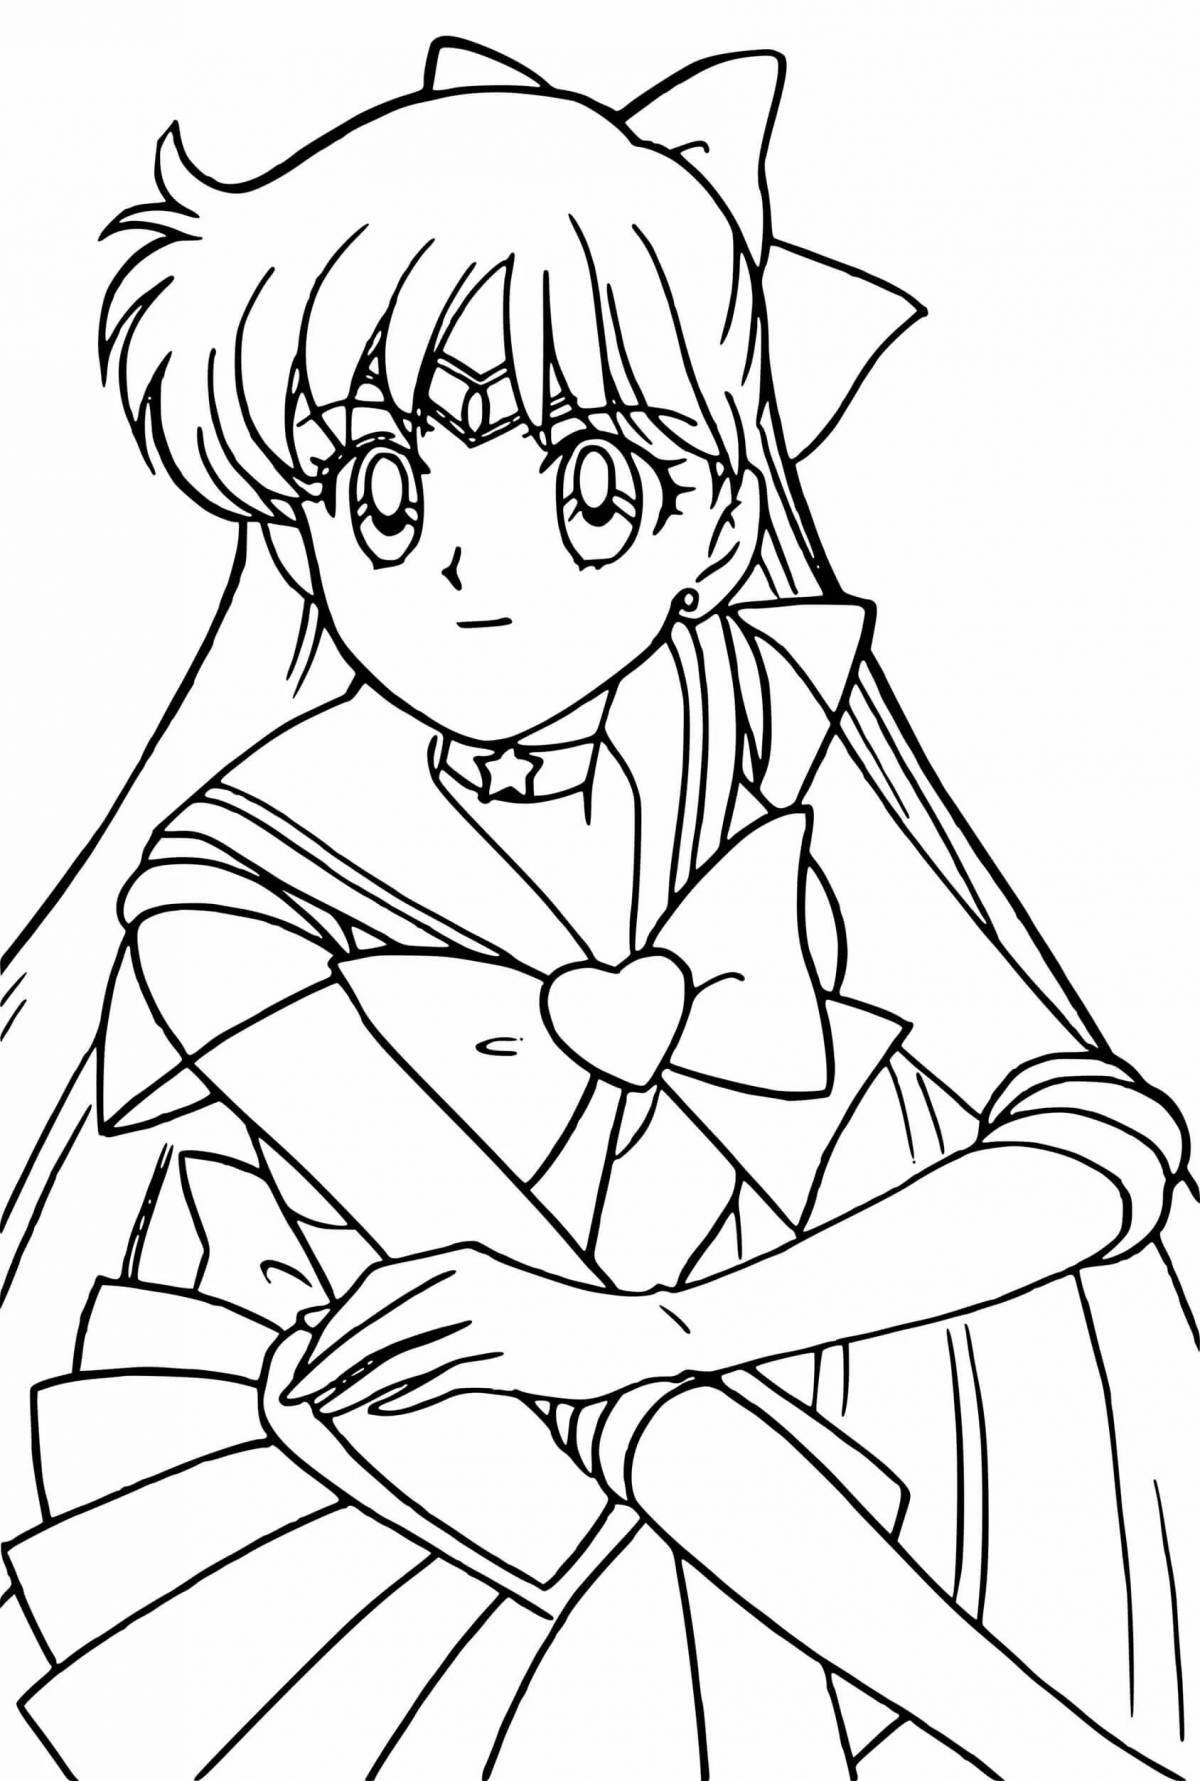 Color-frenzy anime children coloring page